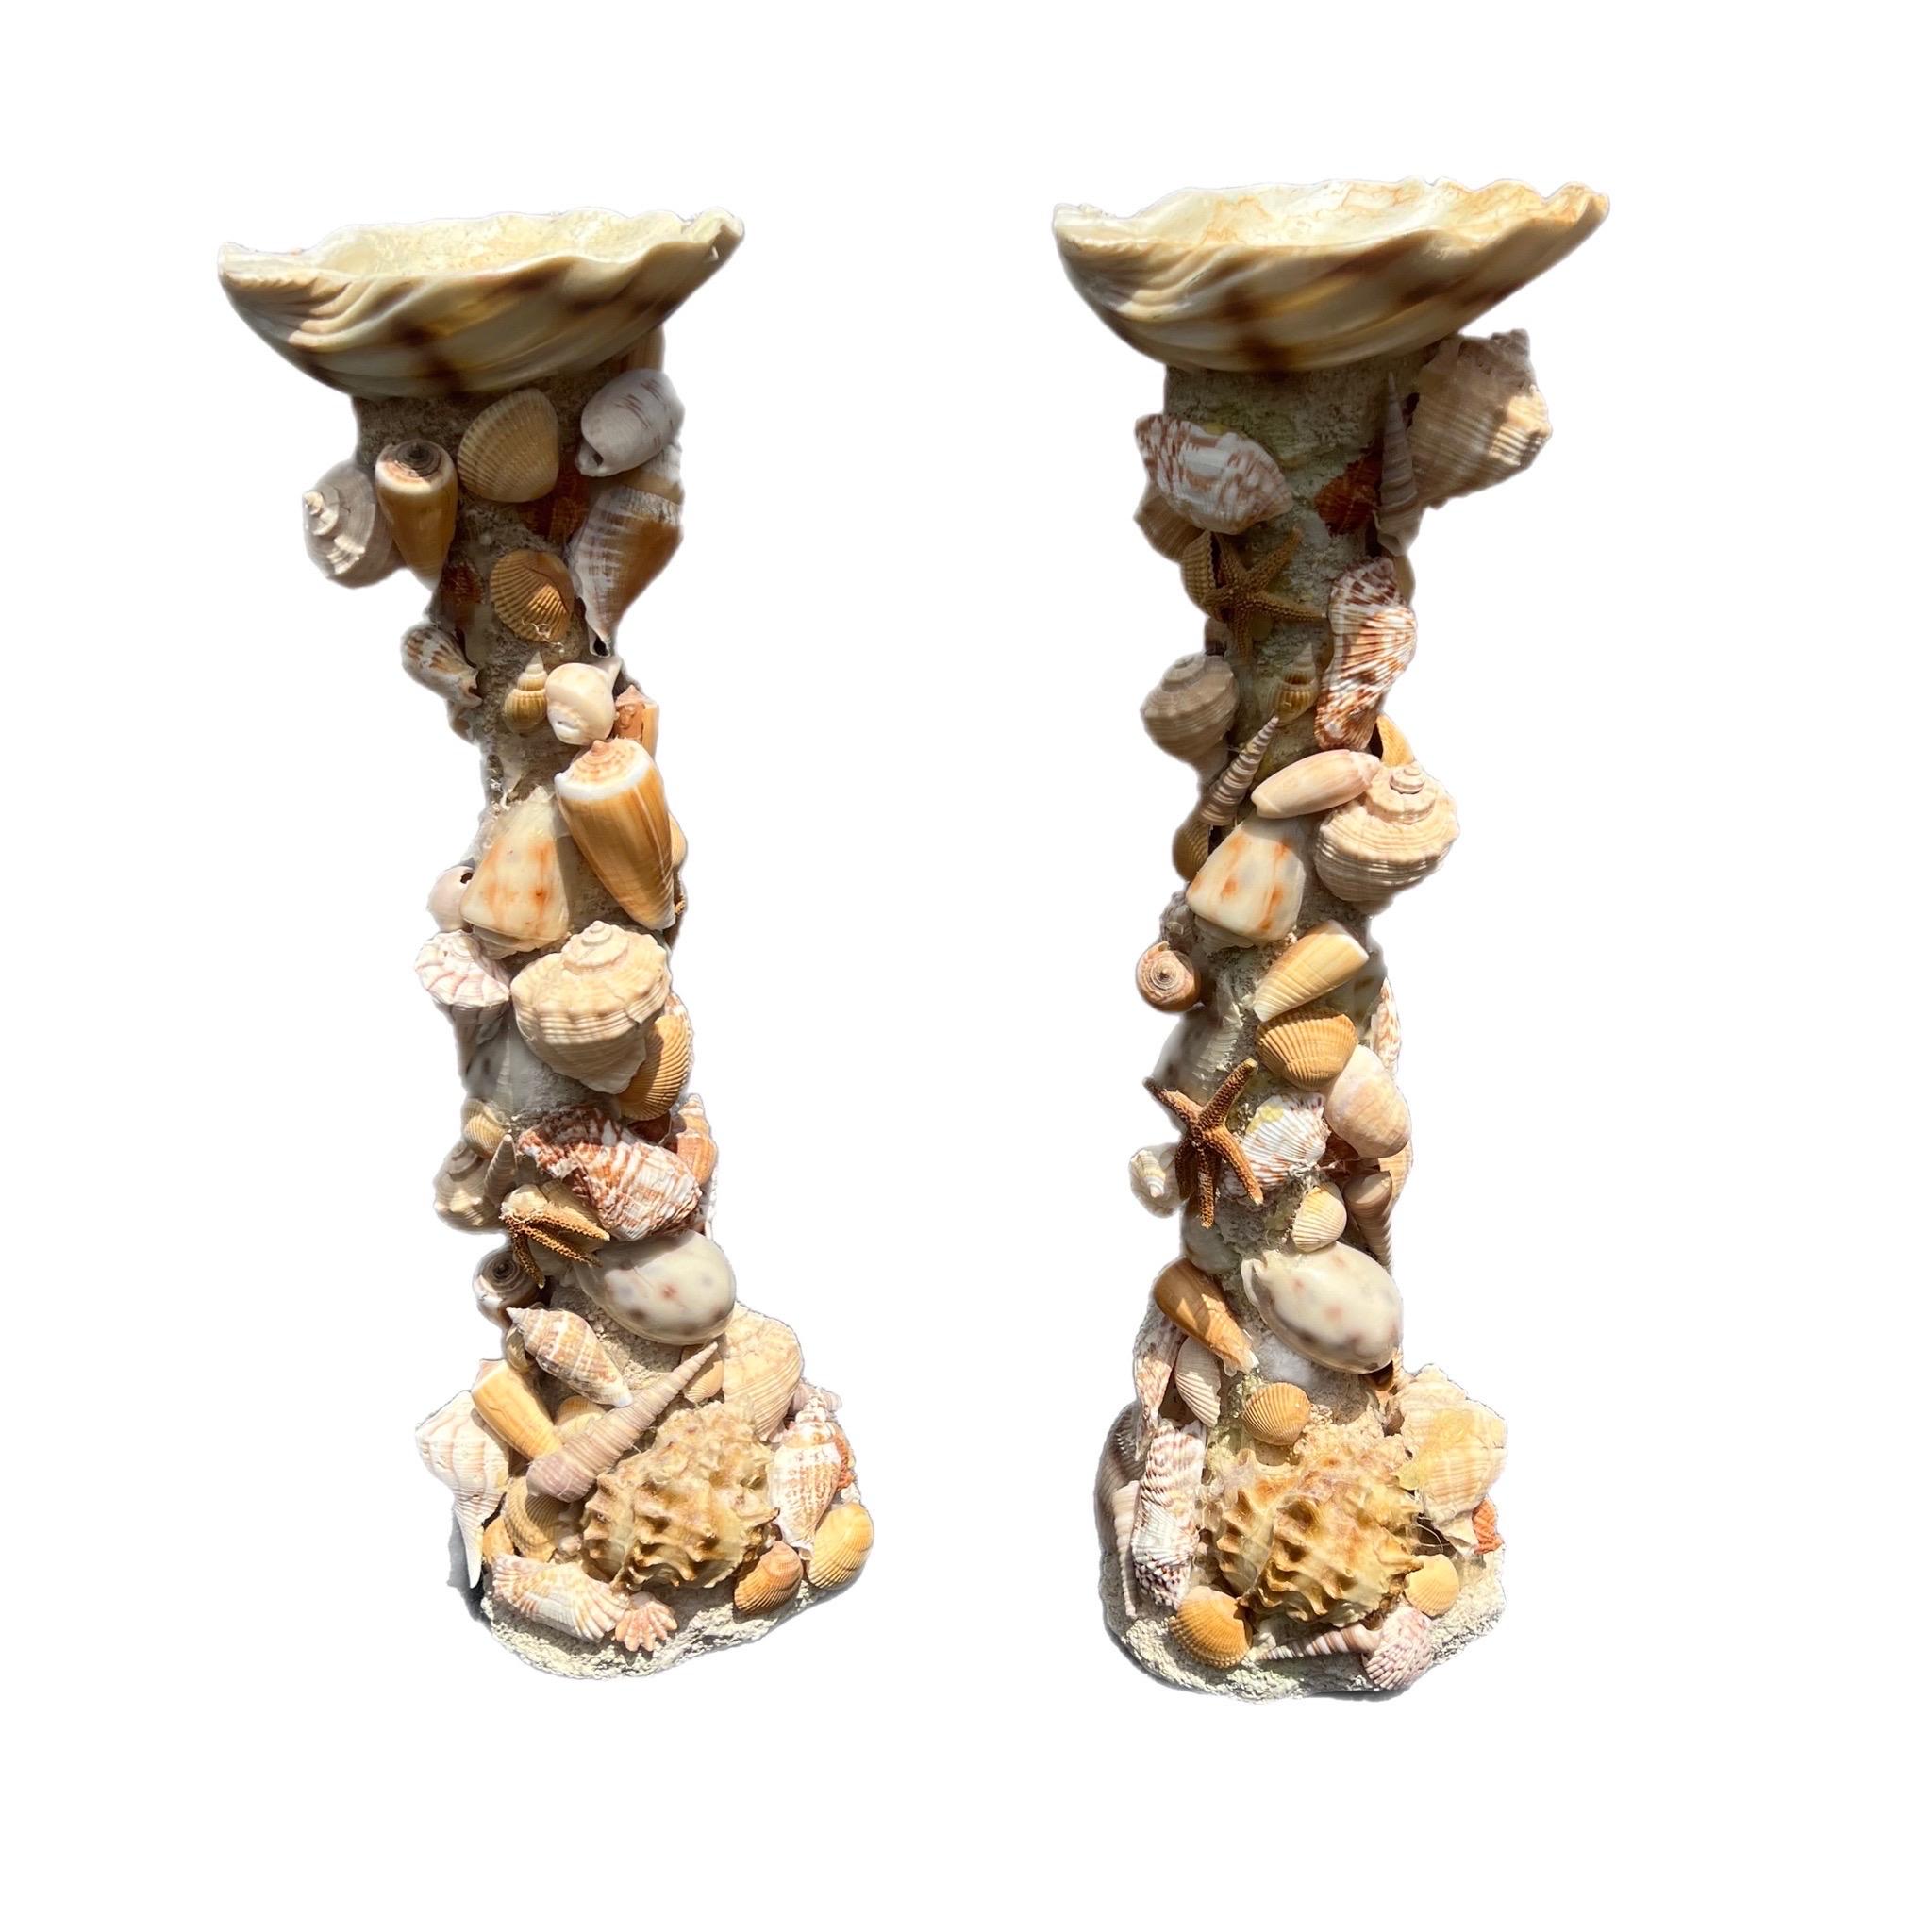 A large pair of shell encrusted pedestal candle holders. Made of resin, grout, and shells. handcrafted circa 1970s-1980s.